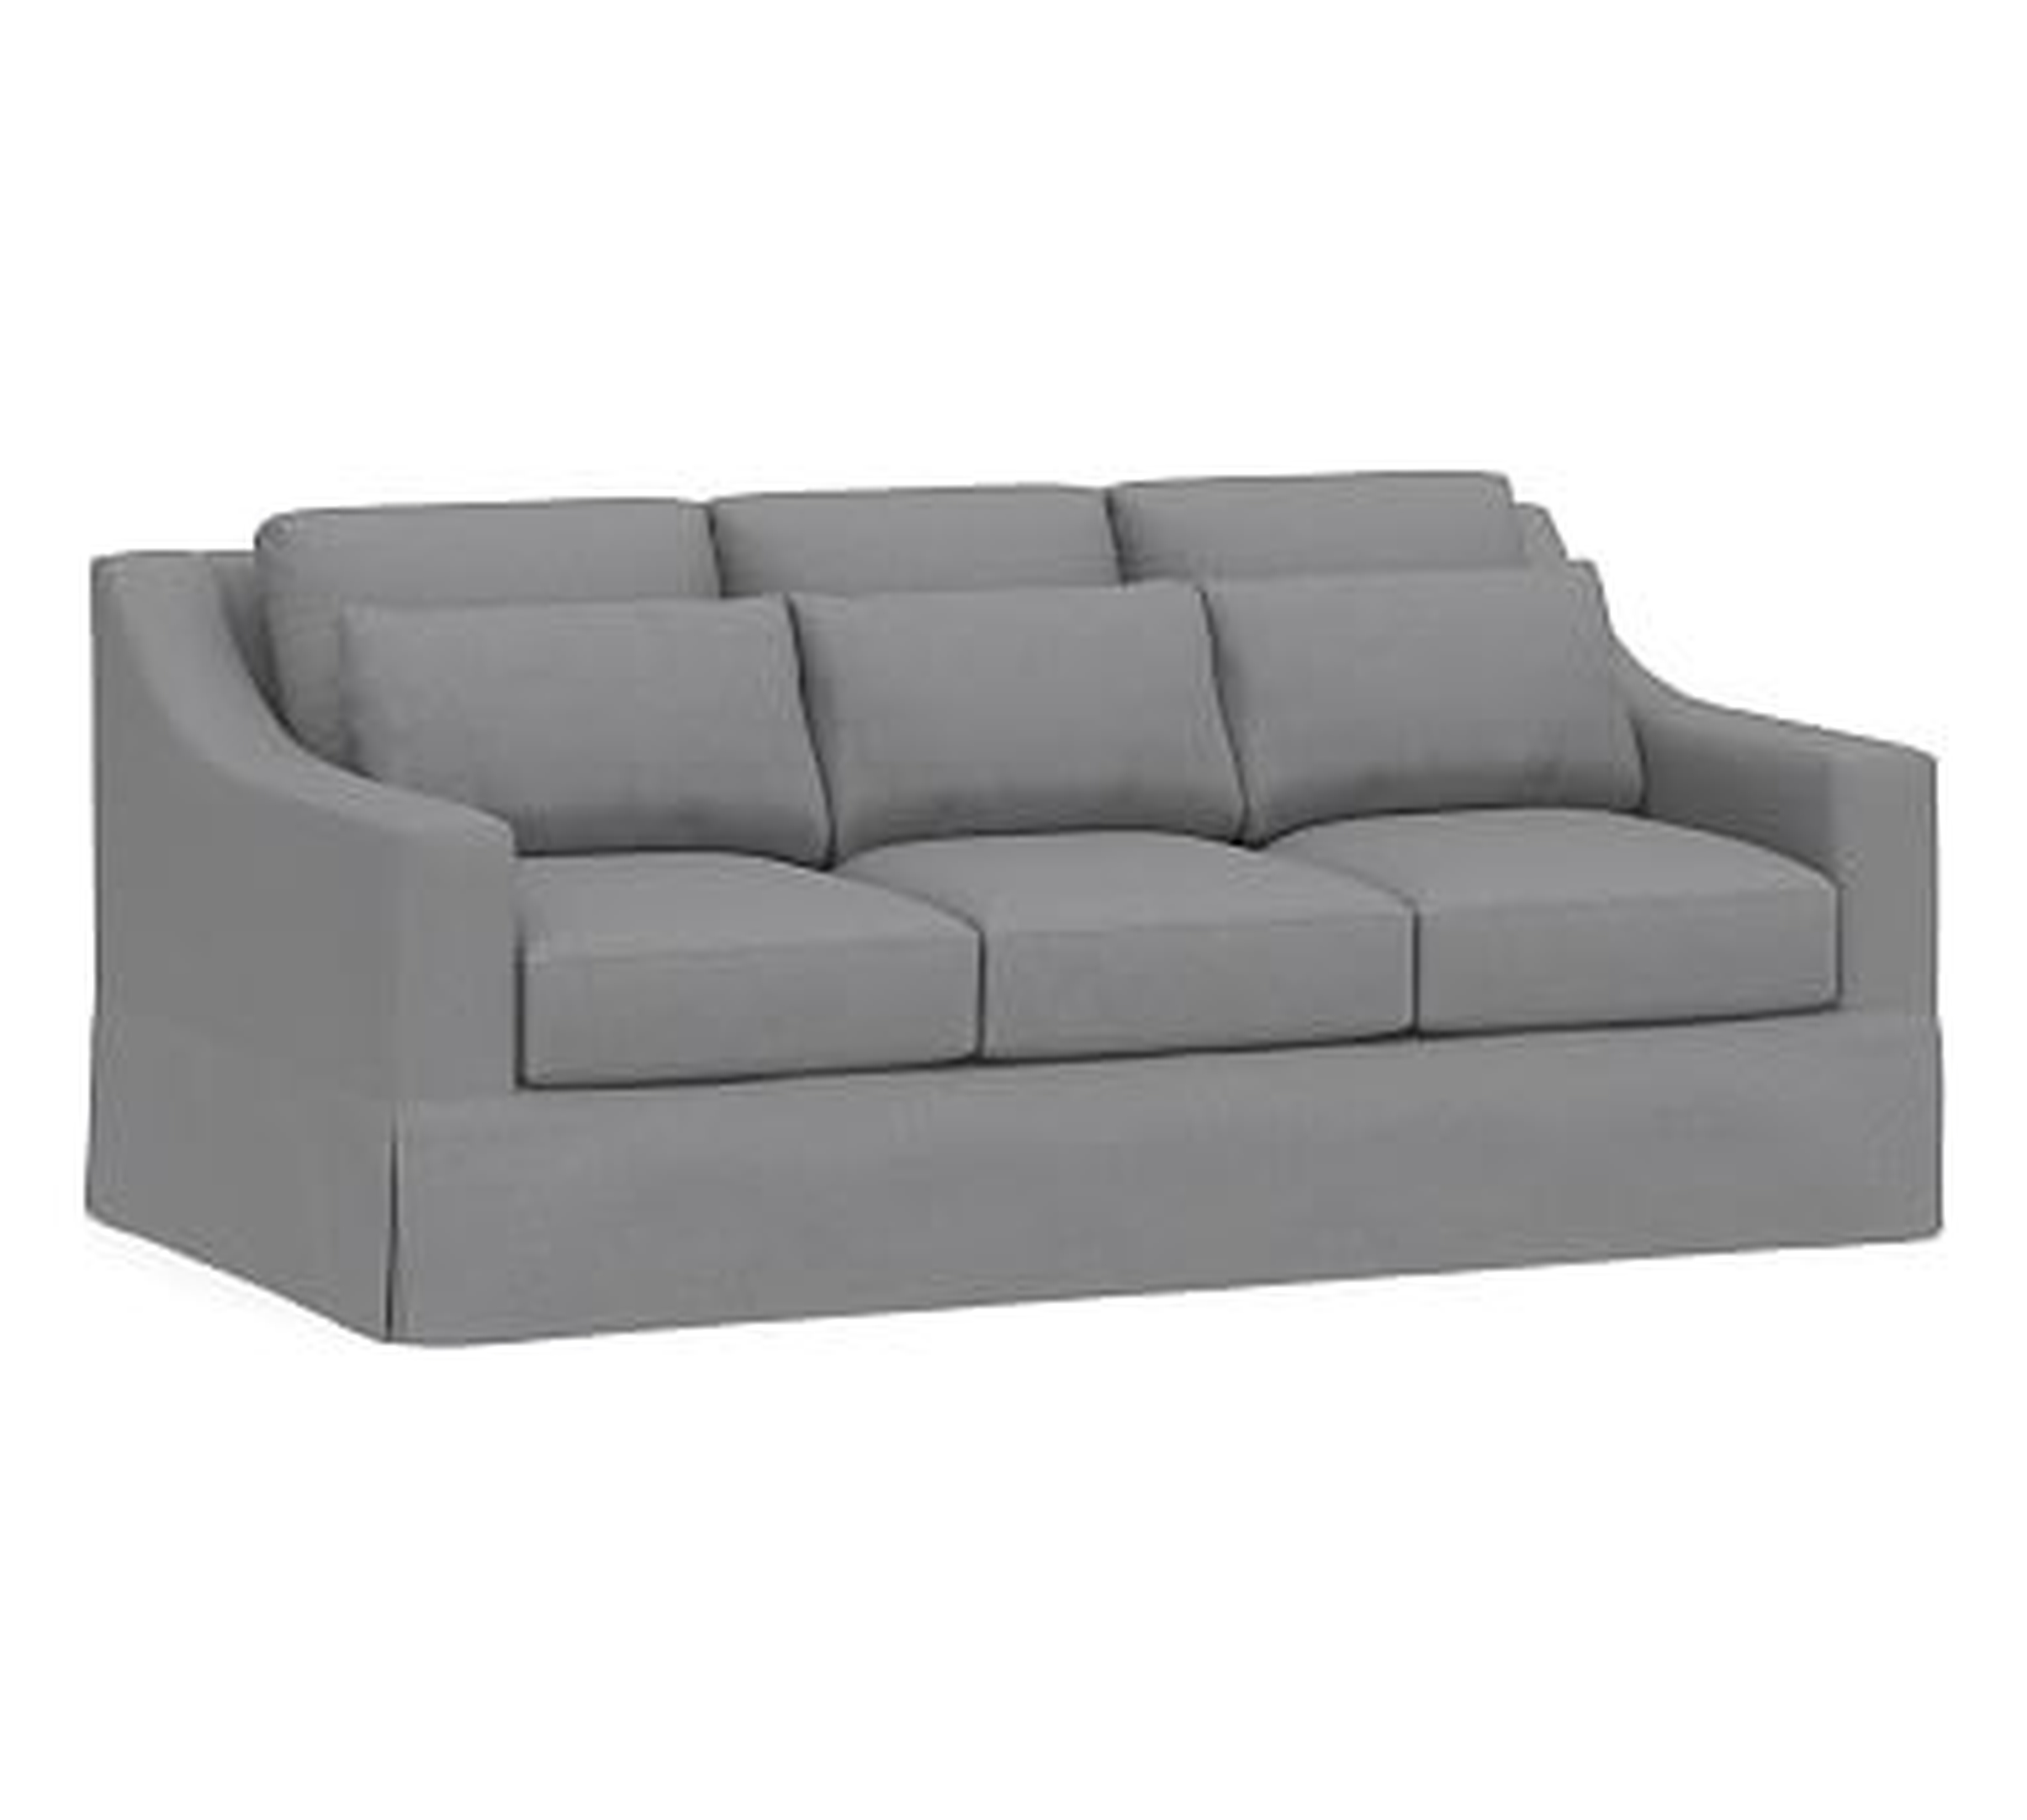 York Slope Arm Slipcovered Deep Seat Sofa 81" 3-Seater, Down Blend Wrapped Cushions, Textured Twill Light Gray - Pottery Barn